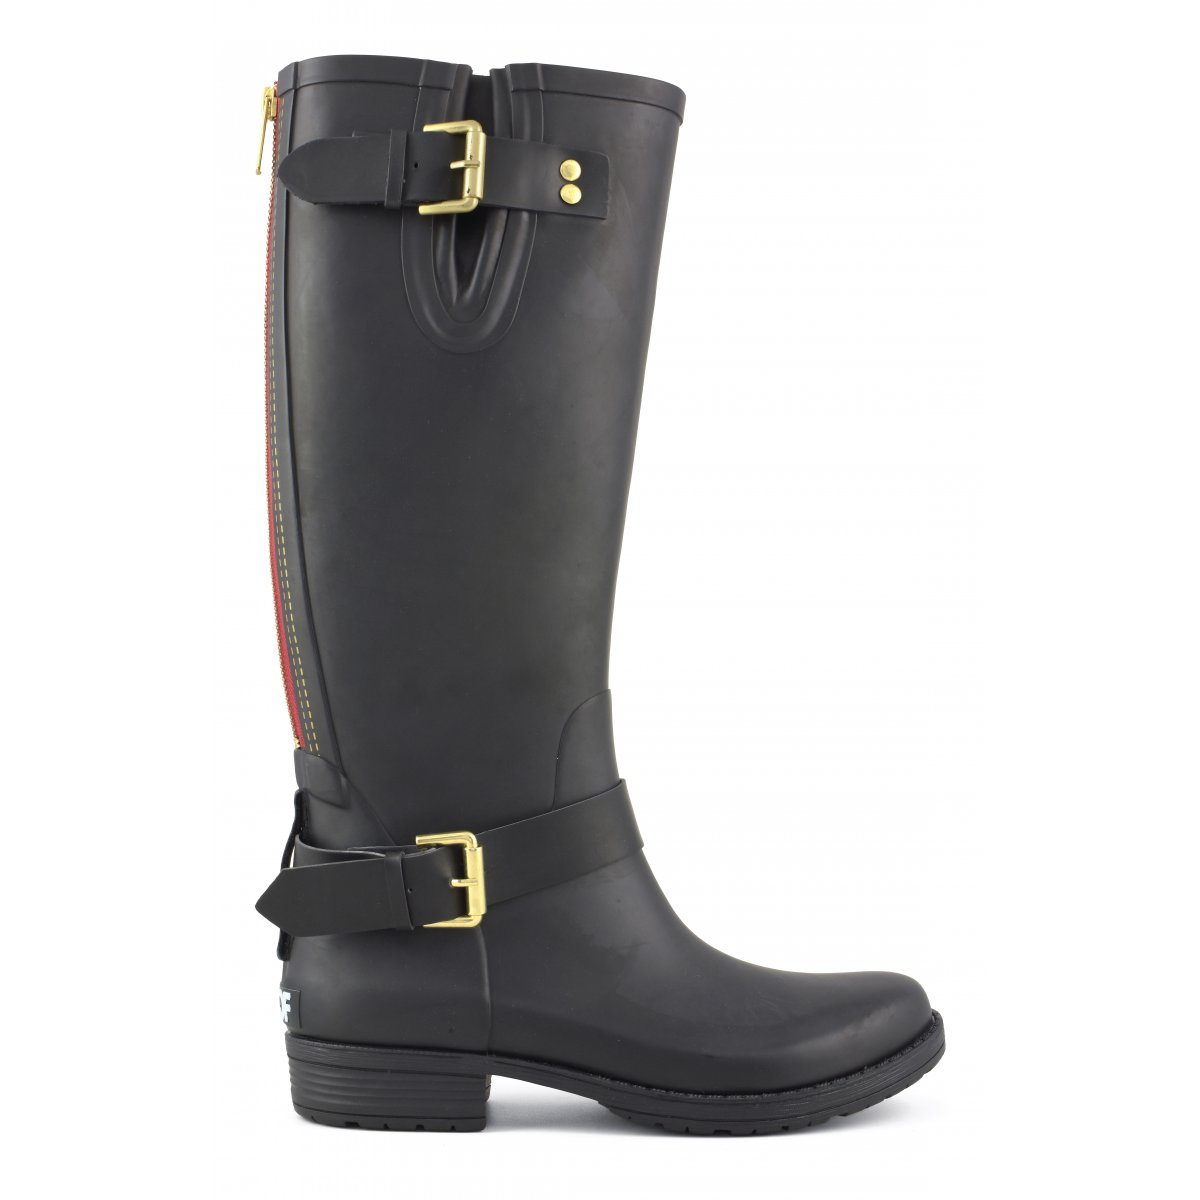 Knee length rubber rain boot with rear 